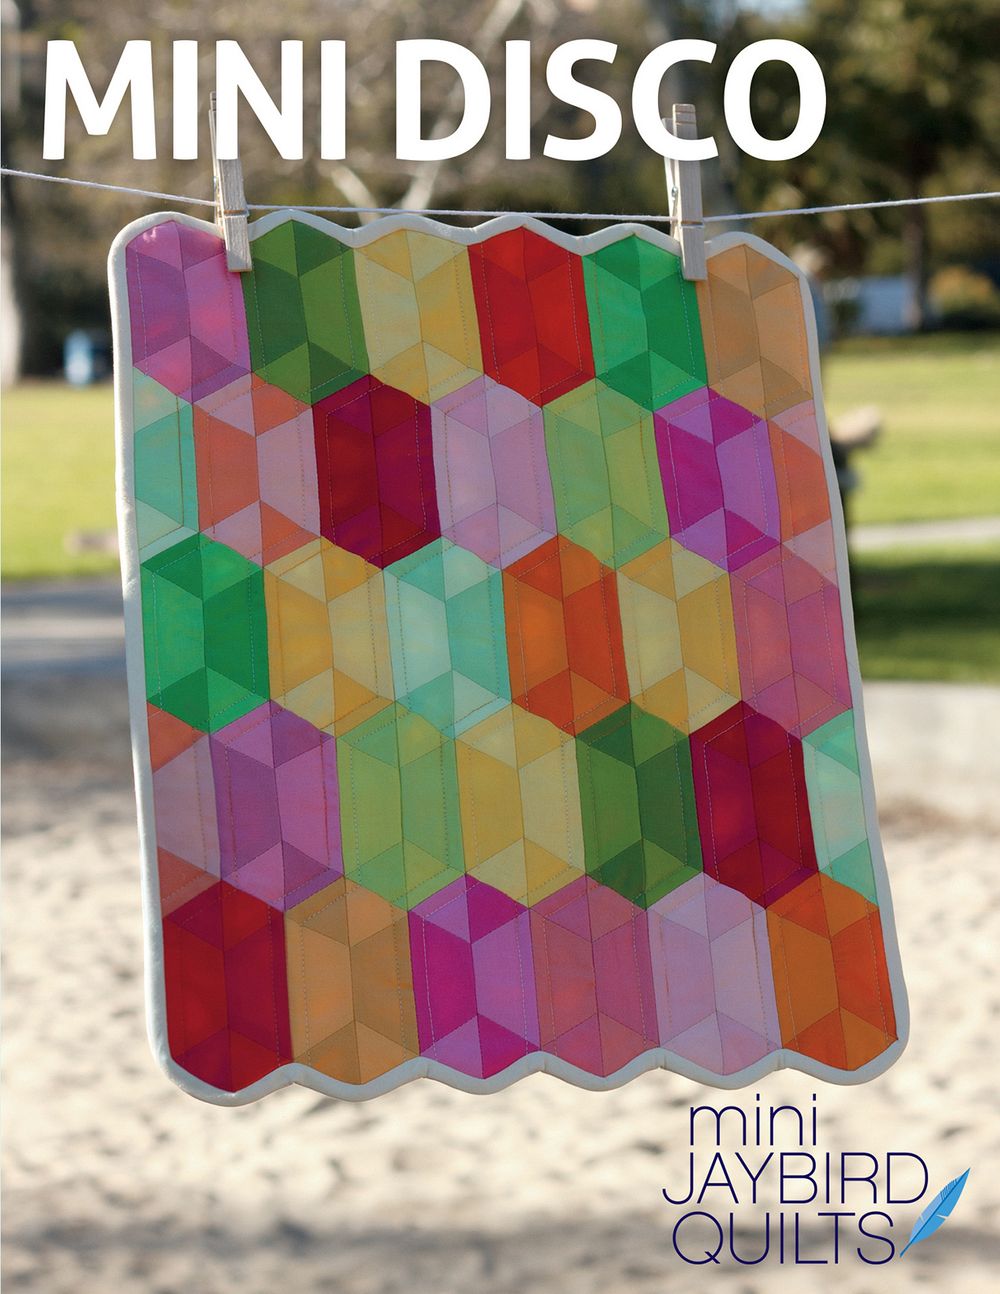 Mini Disco Quilt Pattern By Julie Herman of Jaybird Quilts